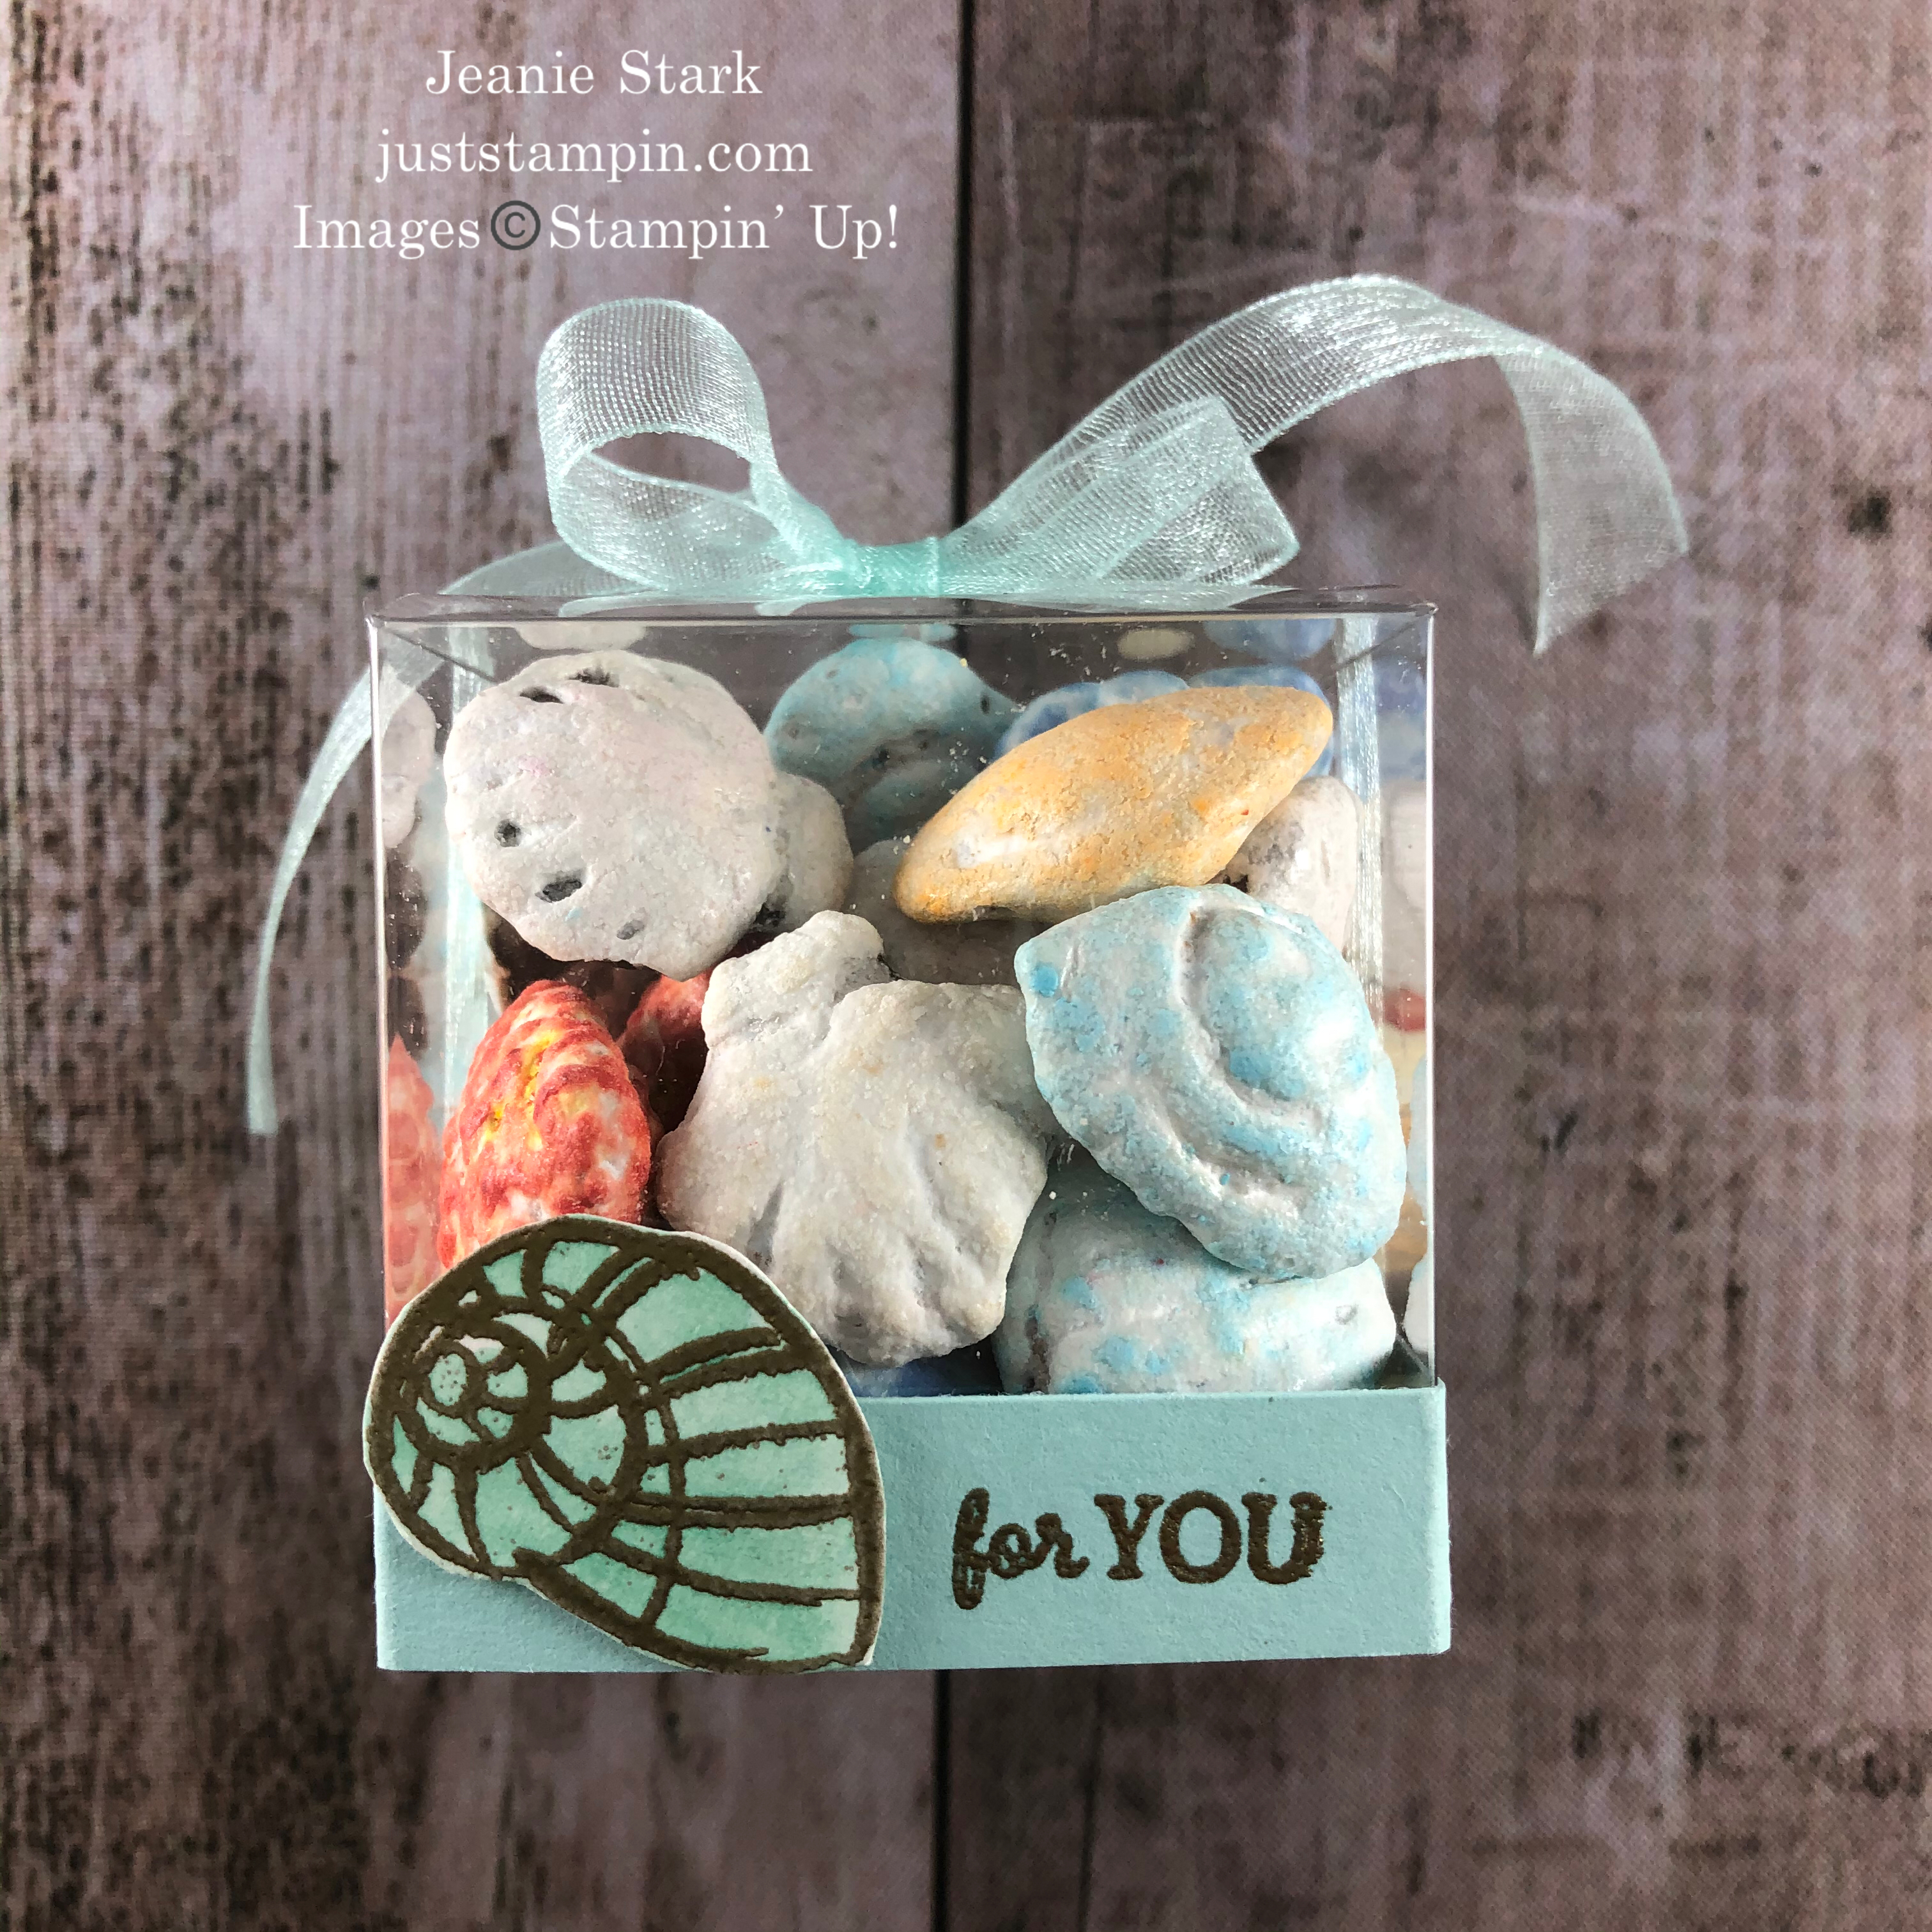 Stampin' Up! clear acetate treat box idea with Seaside Notions - Jeanie Stark StampinUp